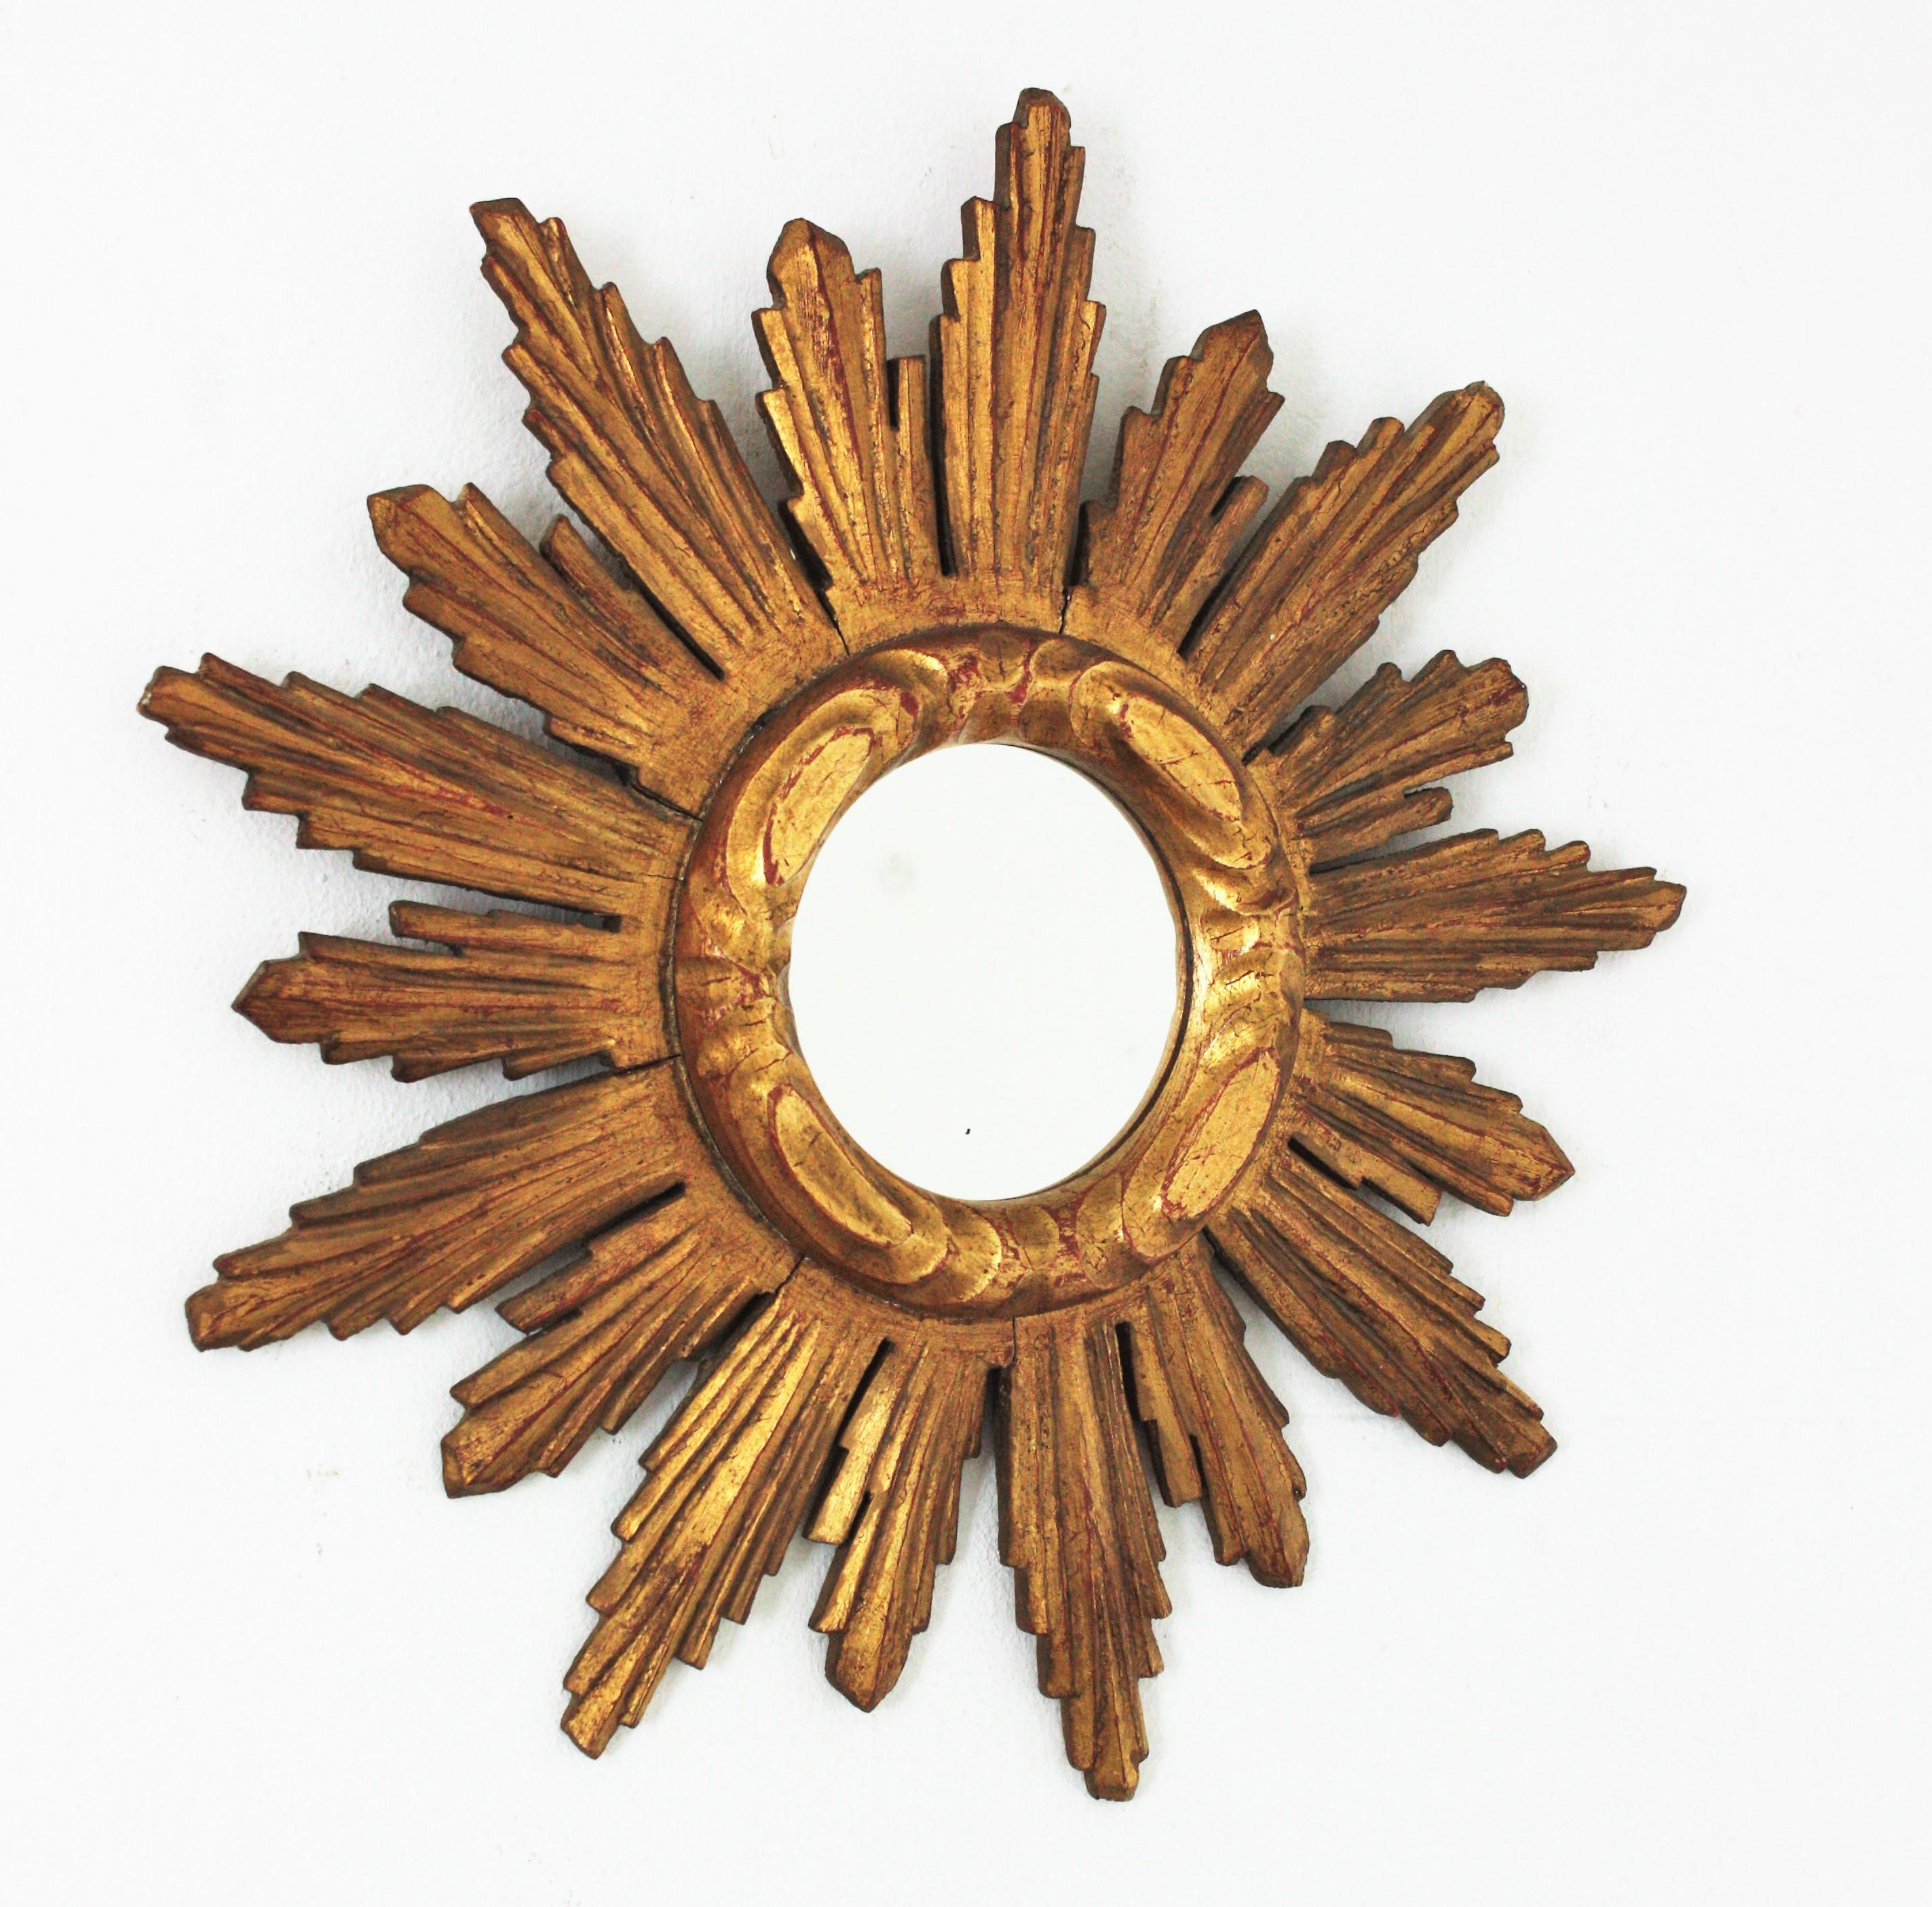 Baroque style carved giltwood sunburst mirror. Spain, 1950s
Eye-catching giltwood sunburst mirror with carved frame and patterned ring surrounding the central round glass
This wall mirror has richly carved details and gold leaf gilding and It has